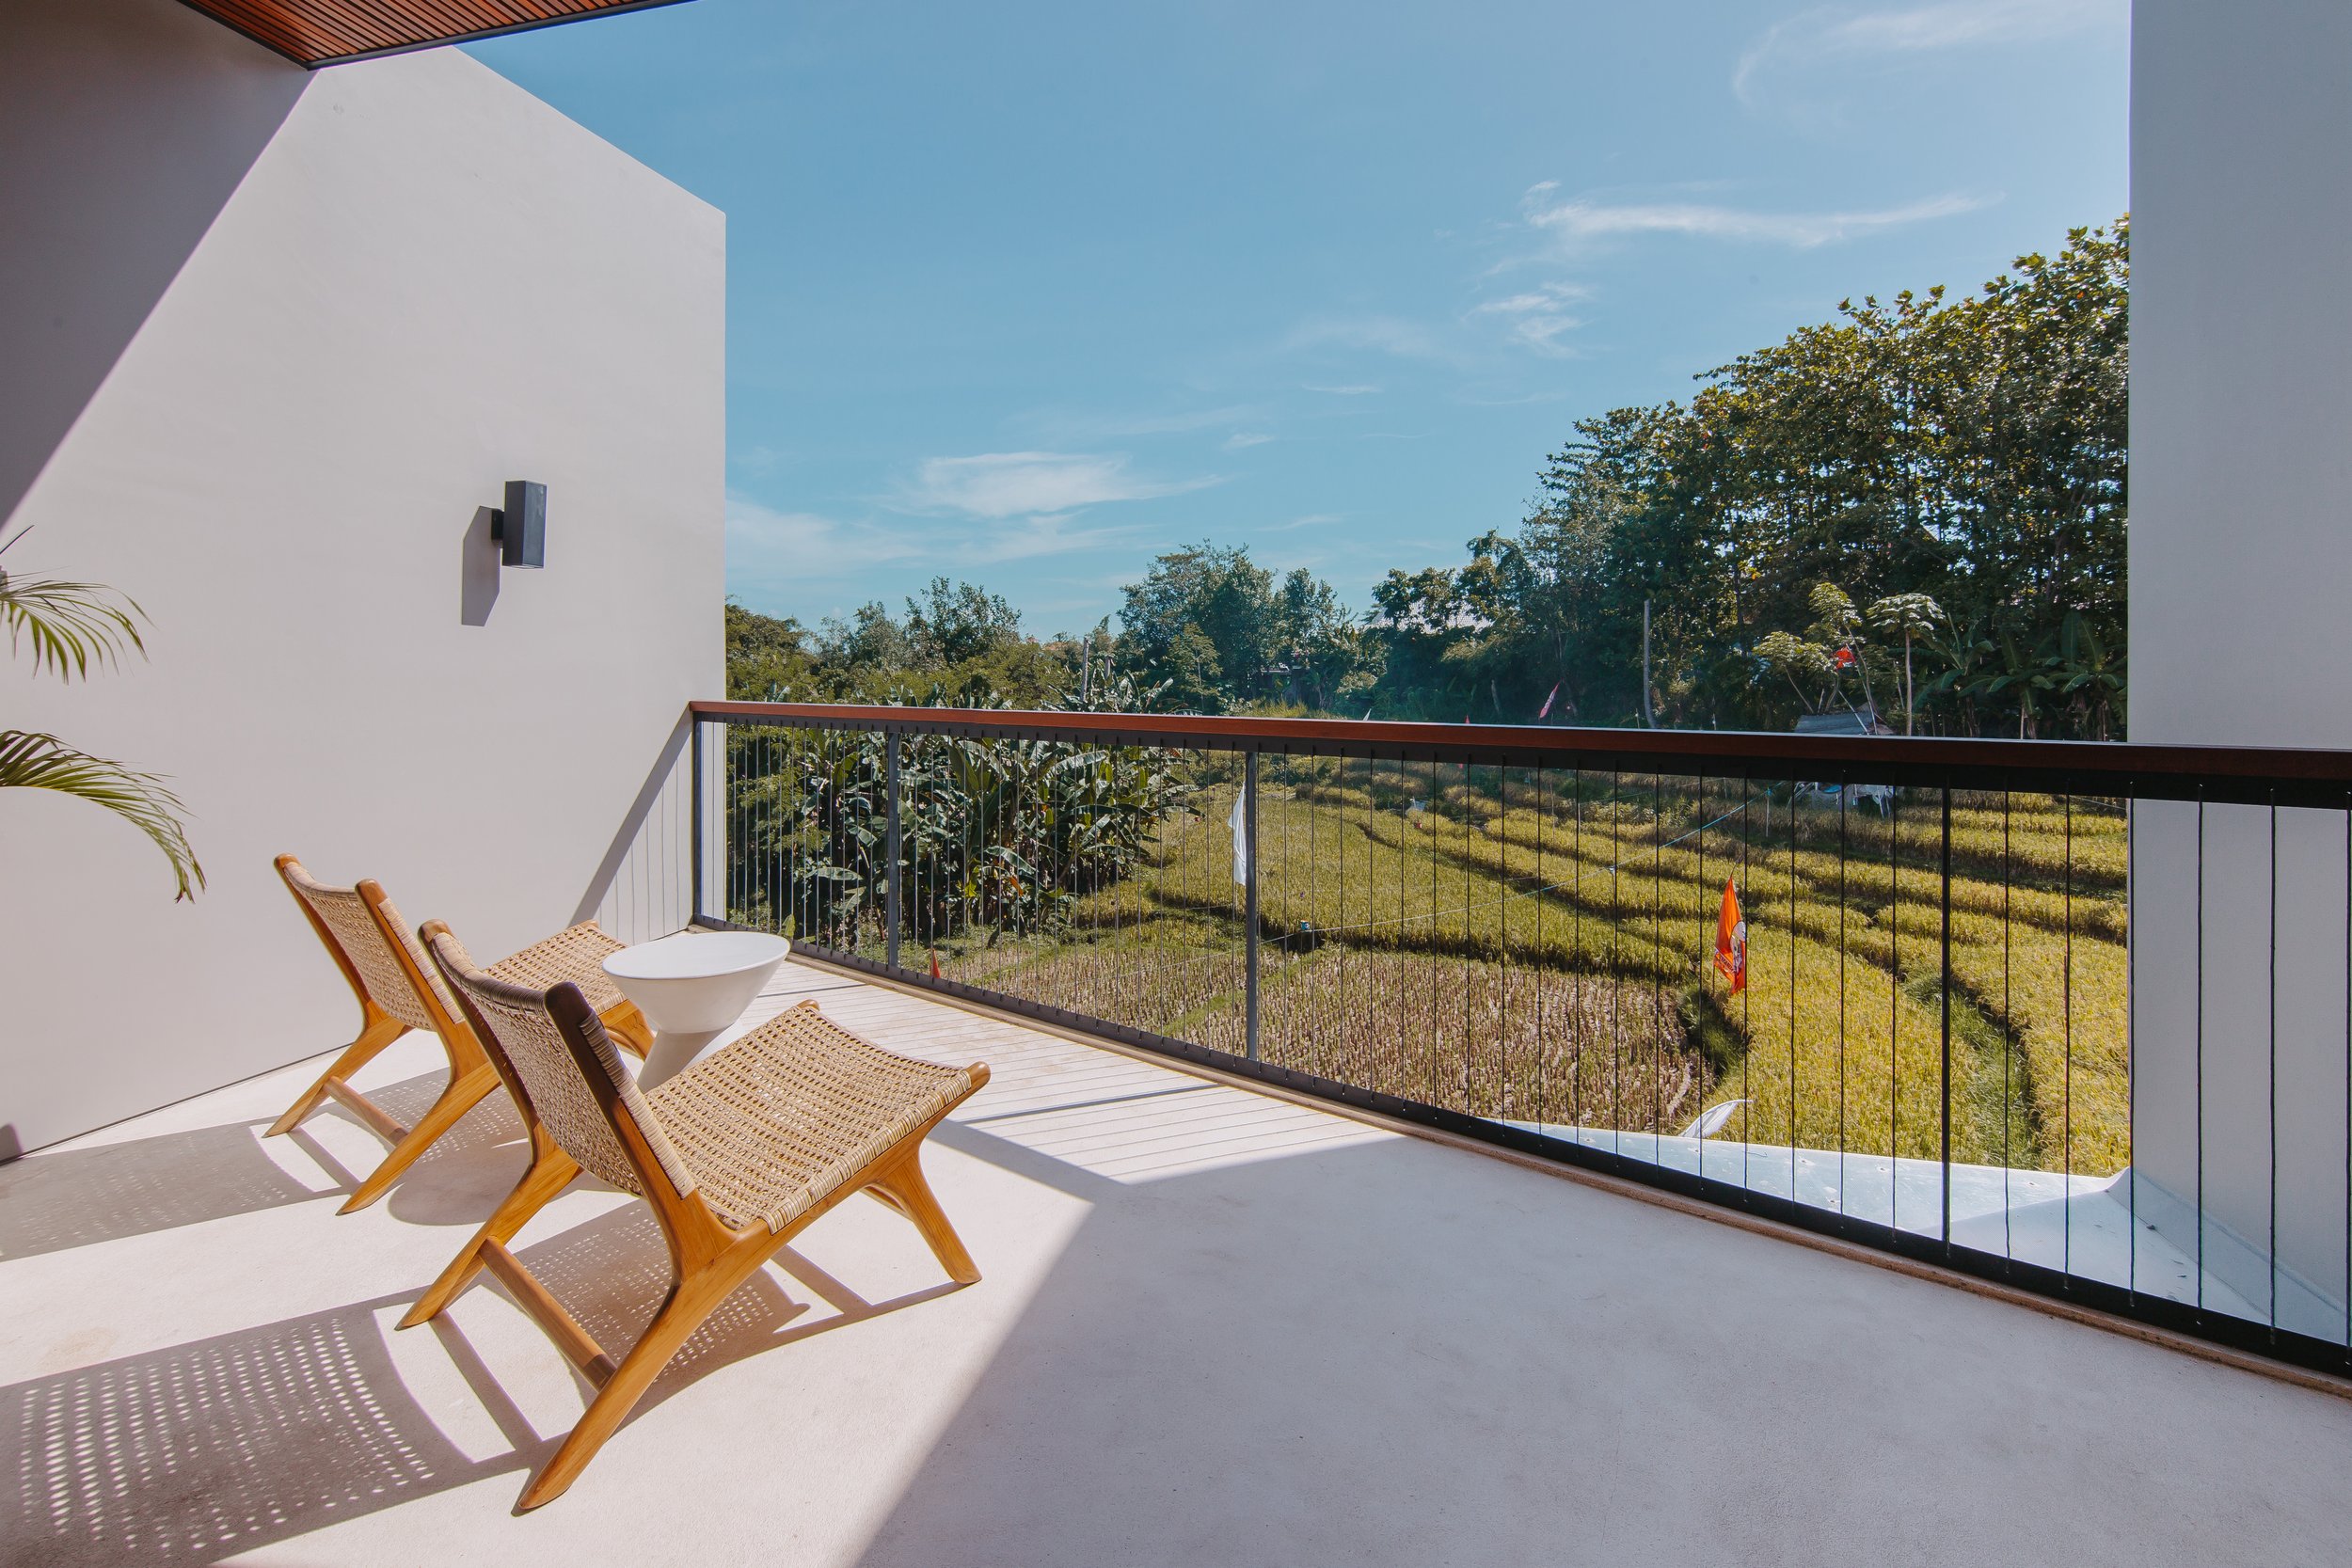 Secluded Studio Apartment in Canggu with Rice Field View Balcony and Modern Amenities